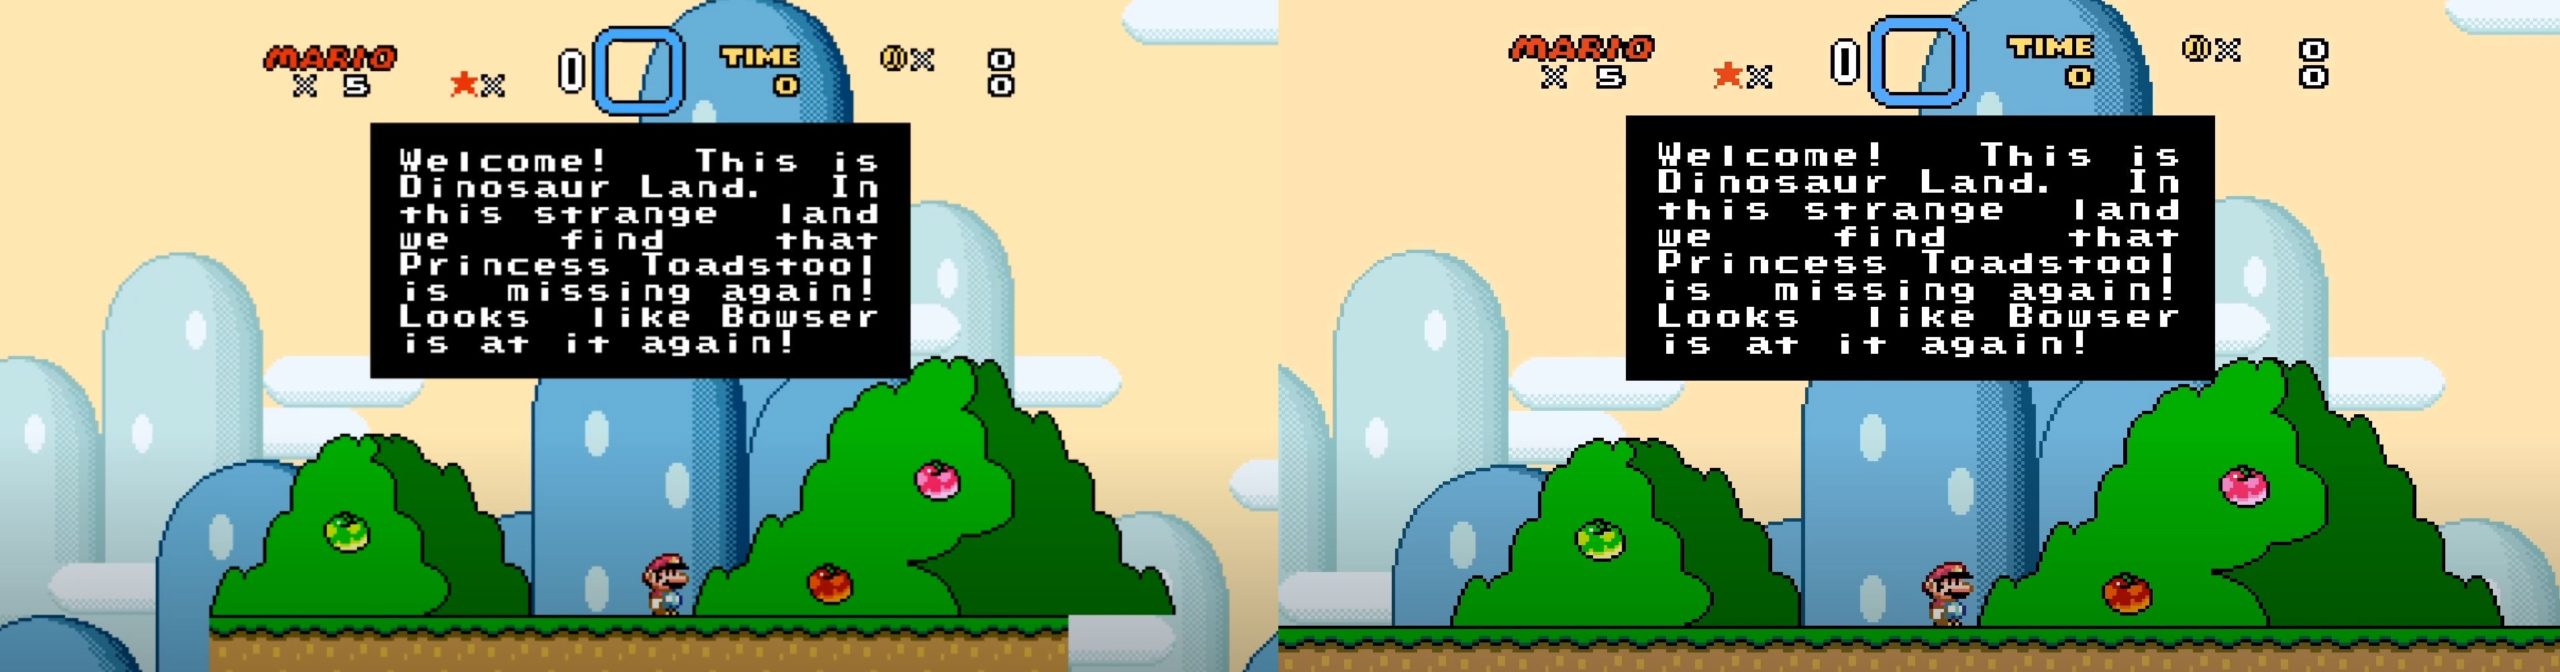 You can now play Super Mario World on modern display resolution